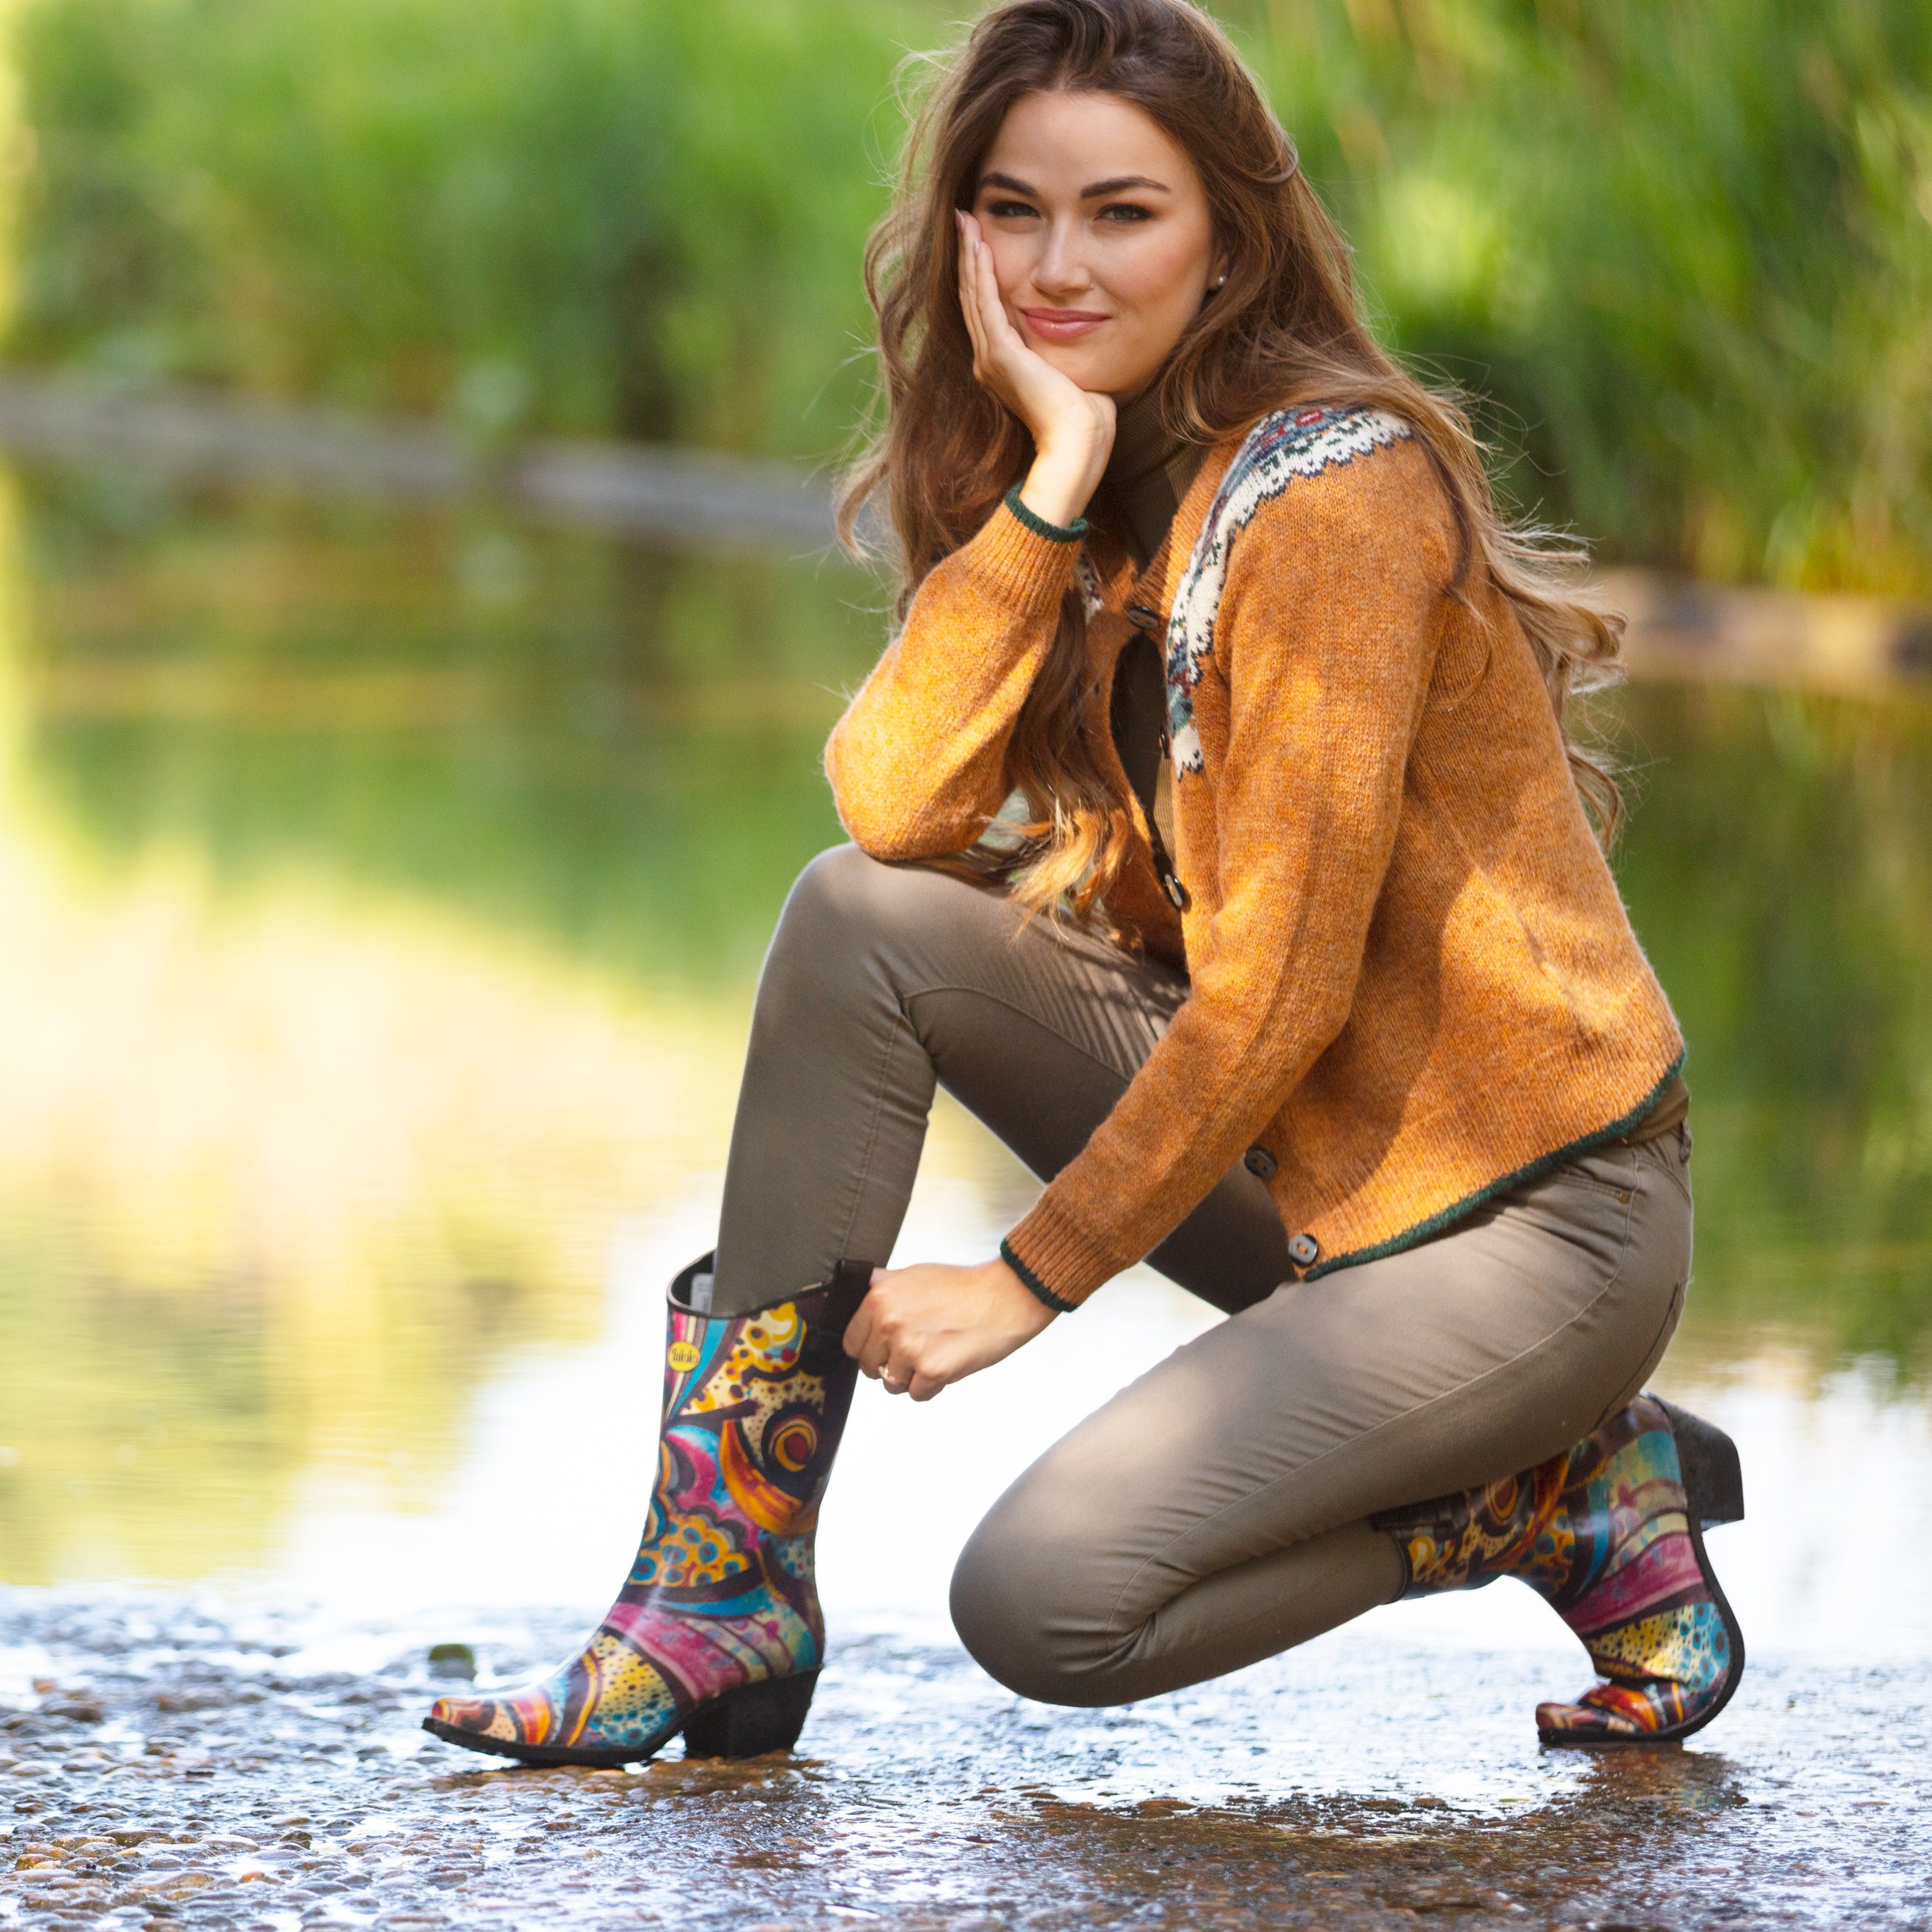 Floral Bliss - floral cowboy boot wellies